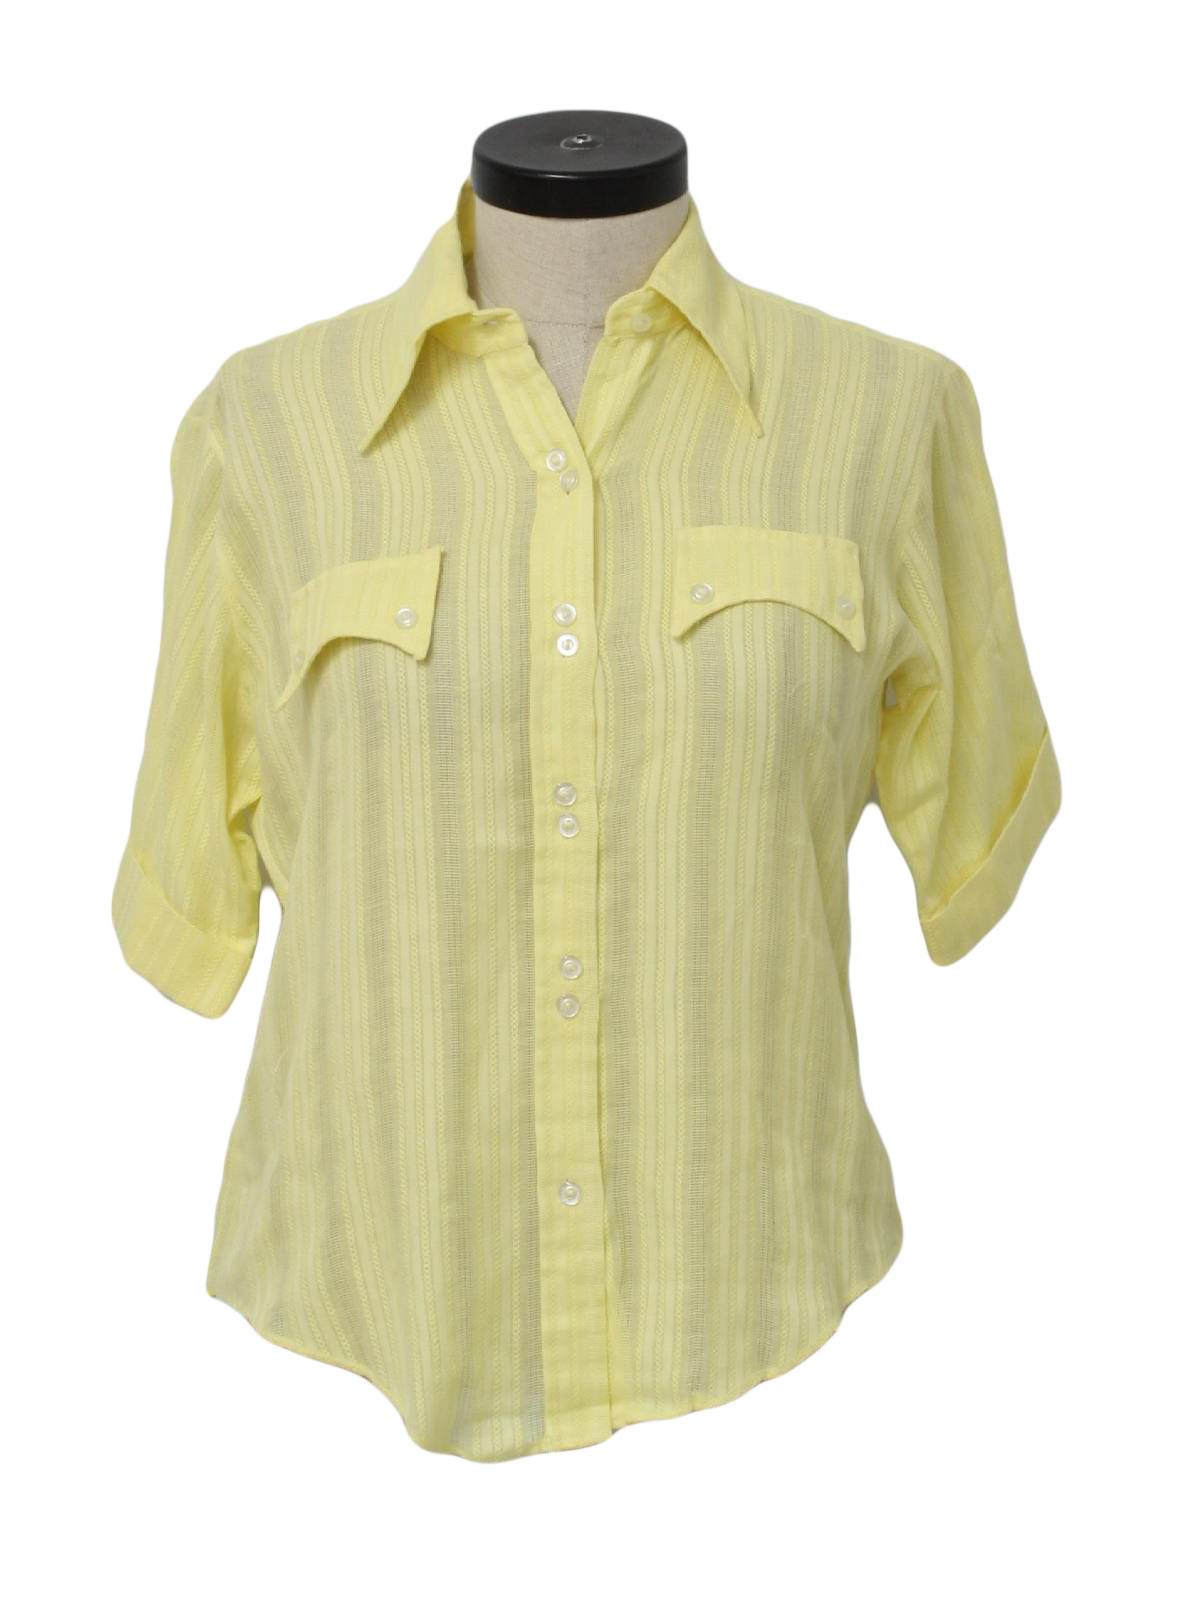 Vintage 1970's Shirt: Early 70s -Missing Label- Womens sunshine yellow ...